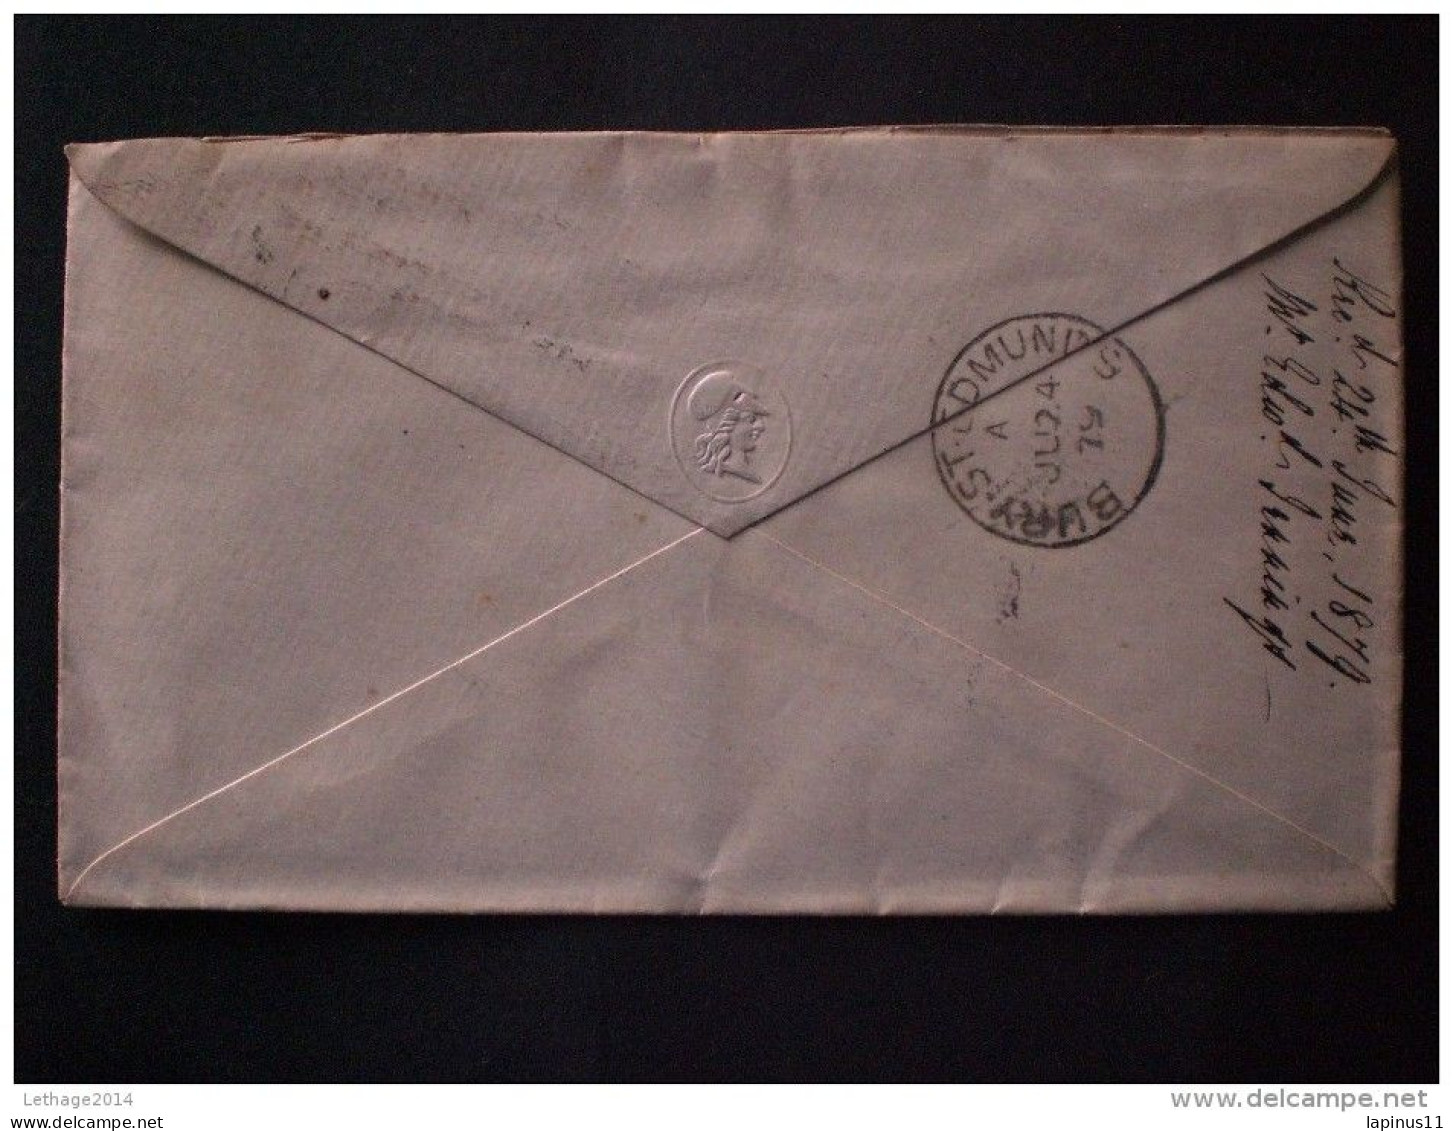 LETTERS TRAVEL GRAN BRETAGNA 1879 COVER ONE PENNY RED GOOD CONSERVATION !!! - Cartas & Documentos